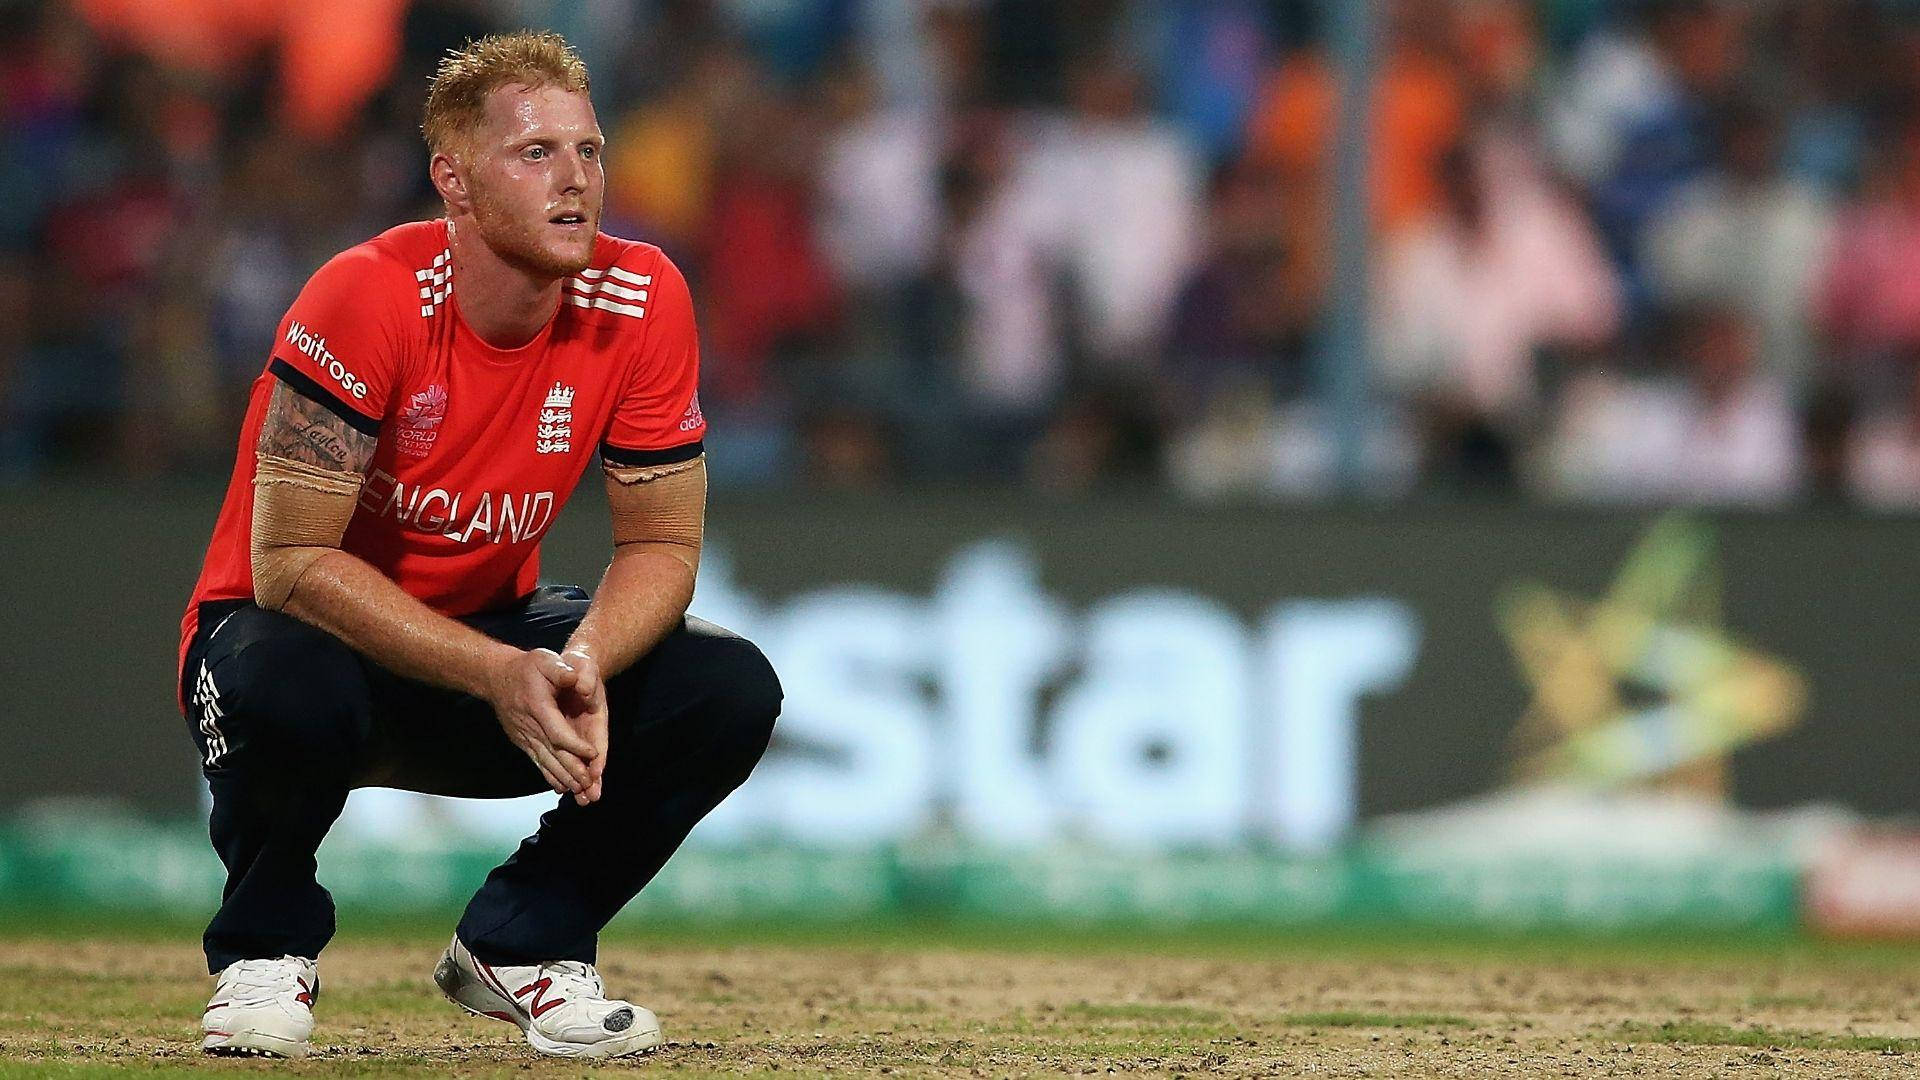 Ben Stokes Resting On The Field Background